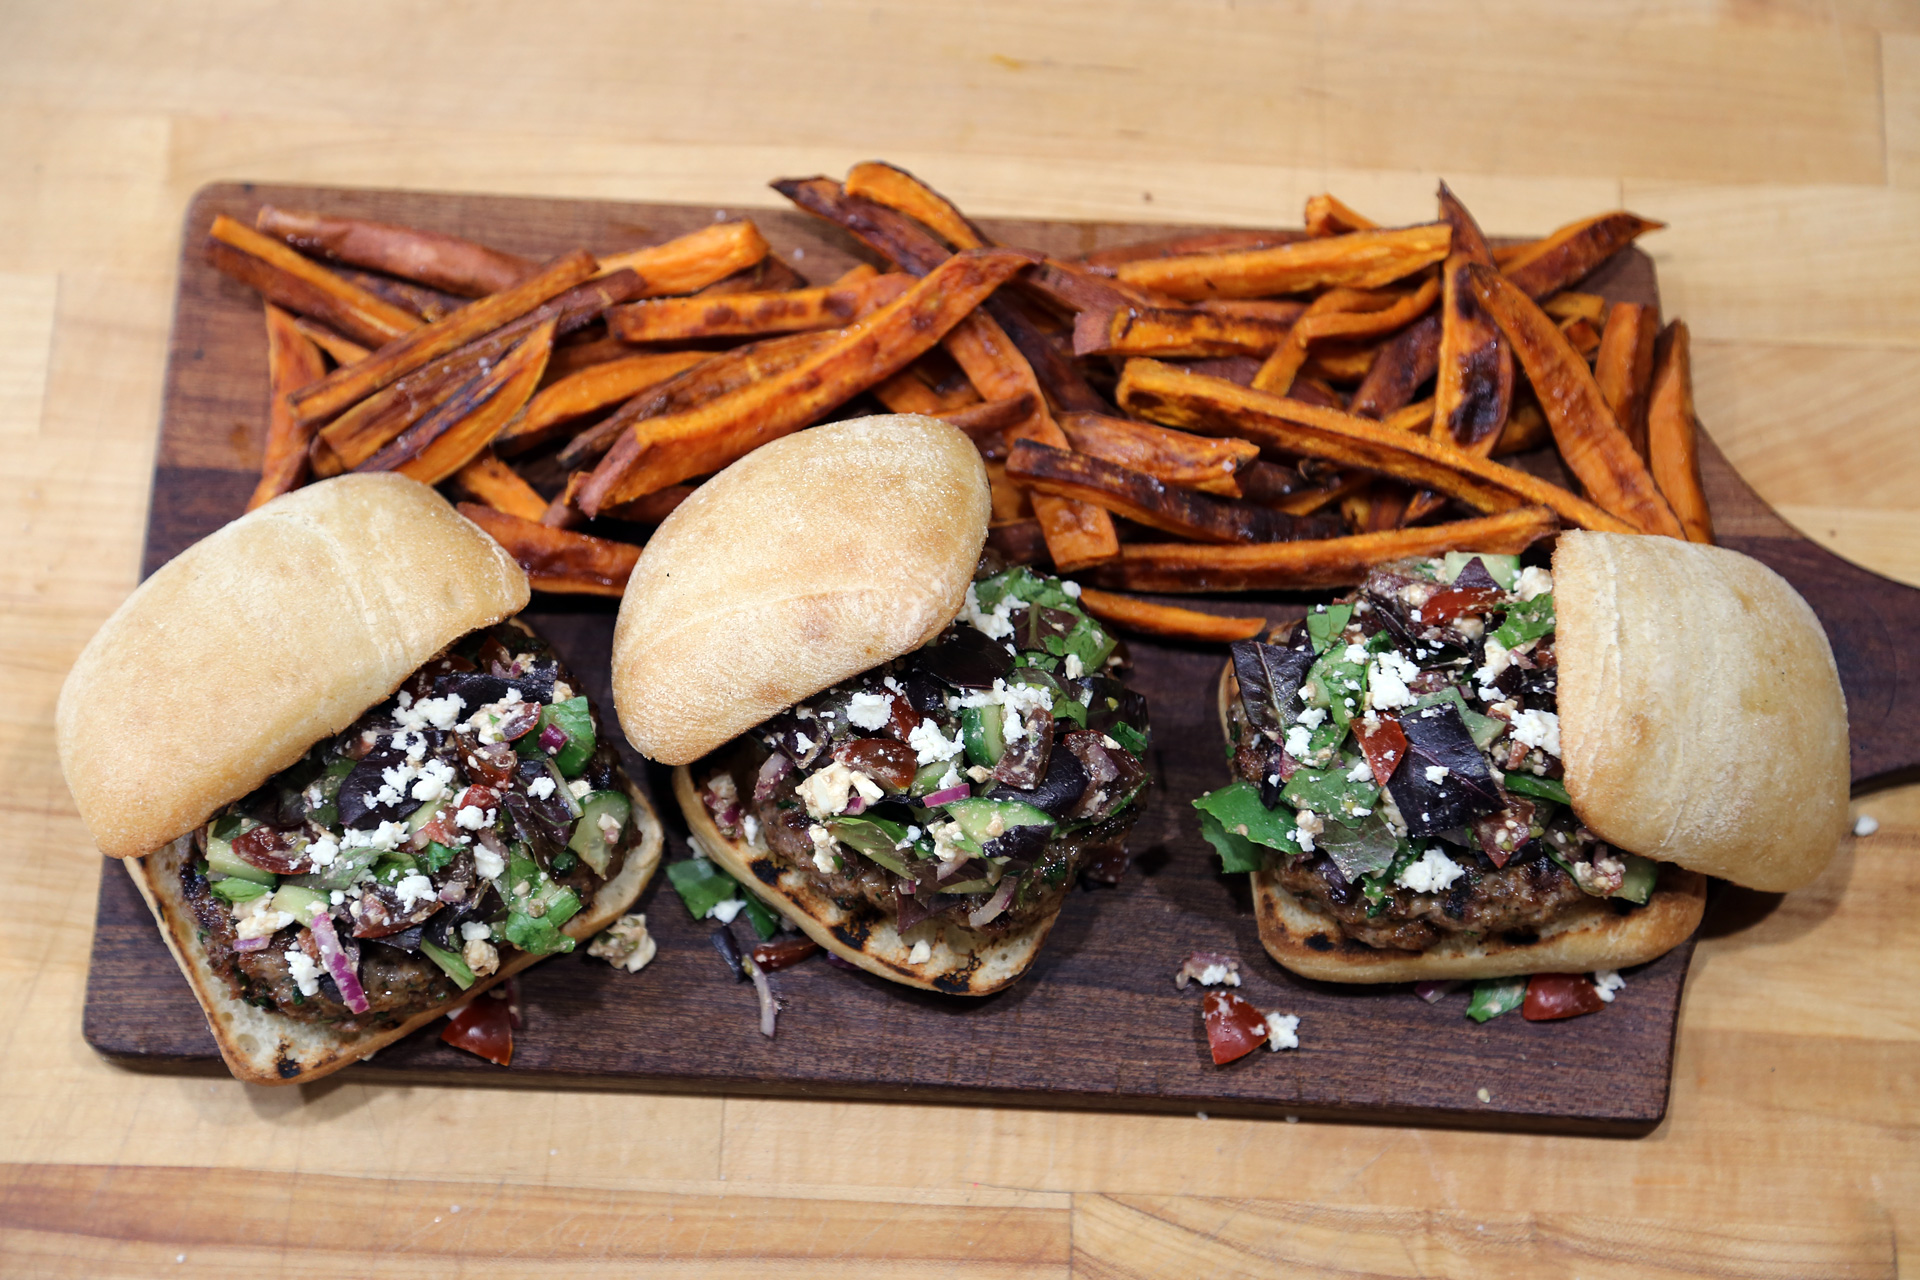 Baked Sweet Potato Fries are a perfect accompaniment to Herbed Lamb Burgers Topped with Chopped Greek Salad.